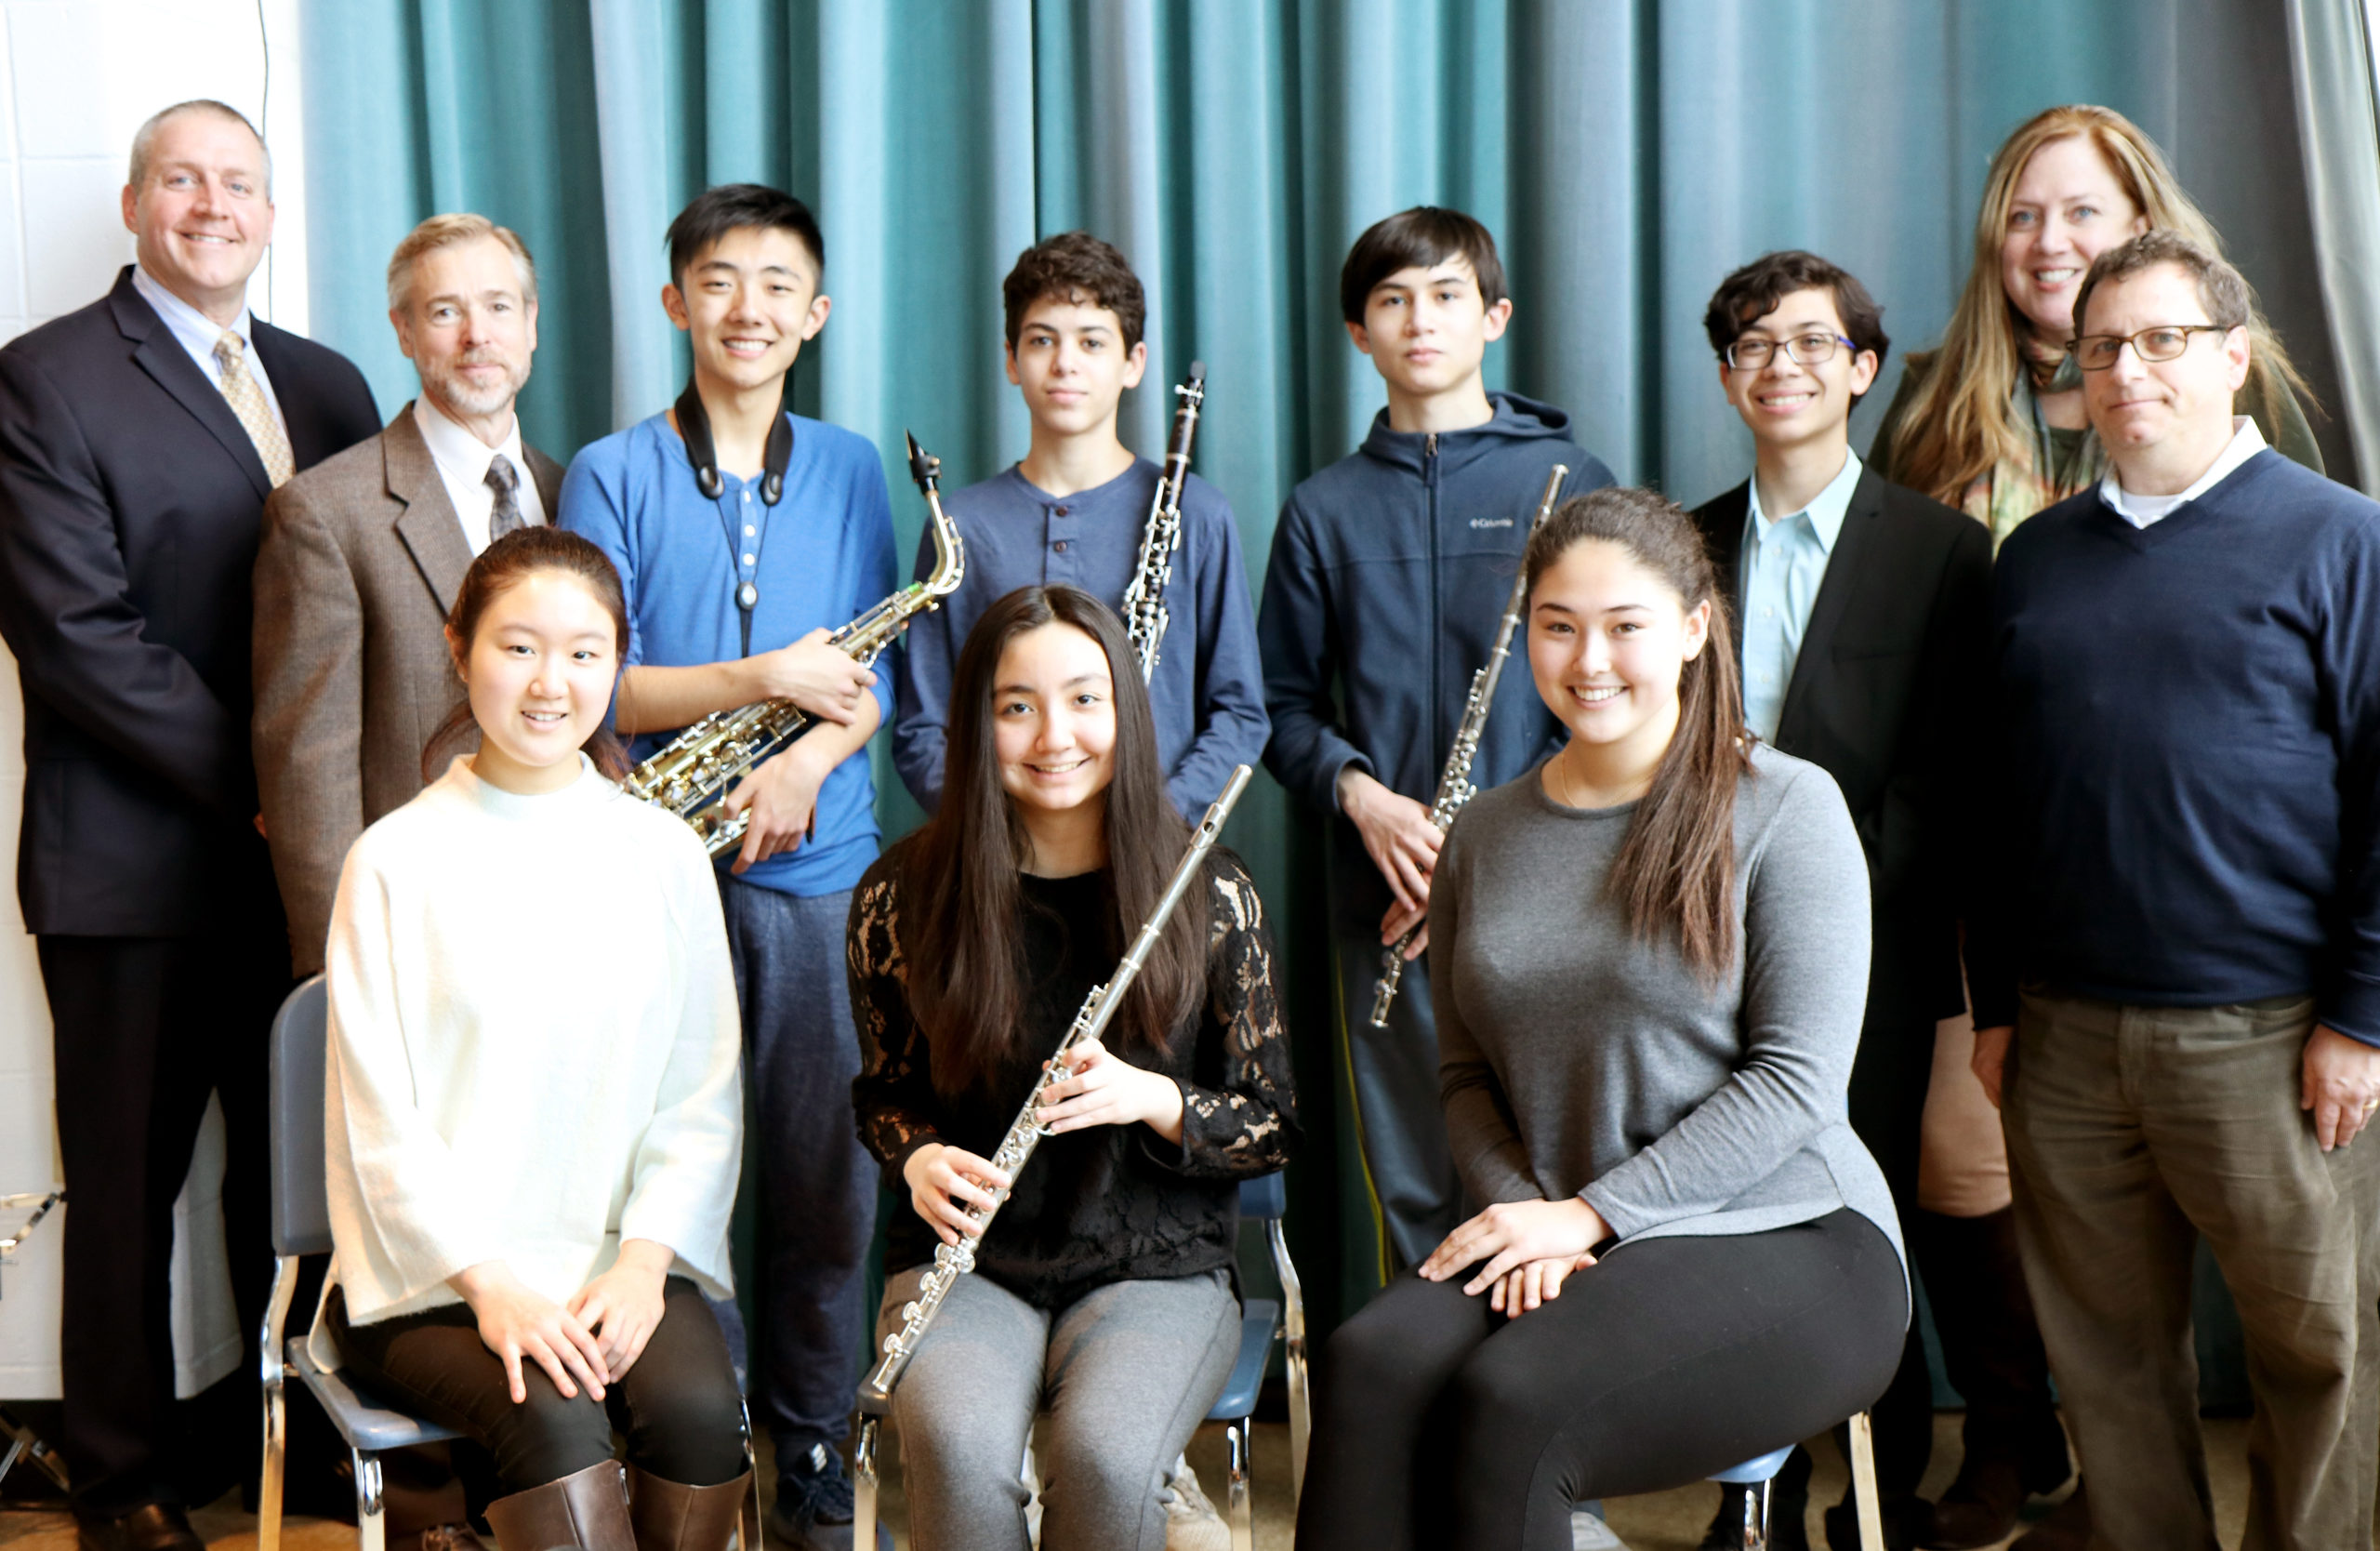 Great Neck South High School musicians Soyoung Park, Christiana Claus, Susan Fendt, Andersen Gu, Eli Goldberger, Samuel Levine, and Benjamin T. Rossen are congratulated by Principal Dr. Christopher Gitz, English Department Chair Dr. David Manuel, Vocal Music Instructor Dr. Jeanine Robinson, and Music Department Chair Michael Schwartz. (Photo courtesy of Great Neck Public Schools)